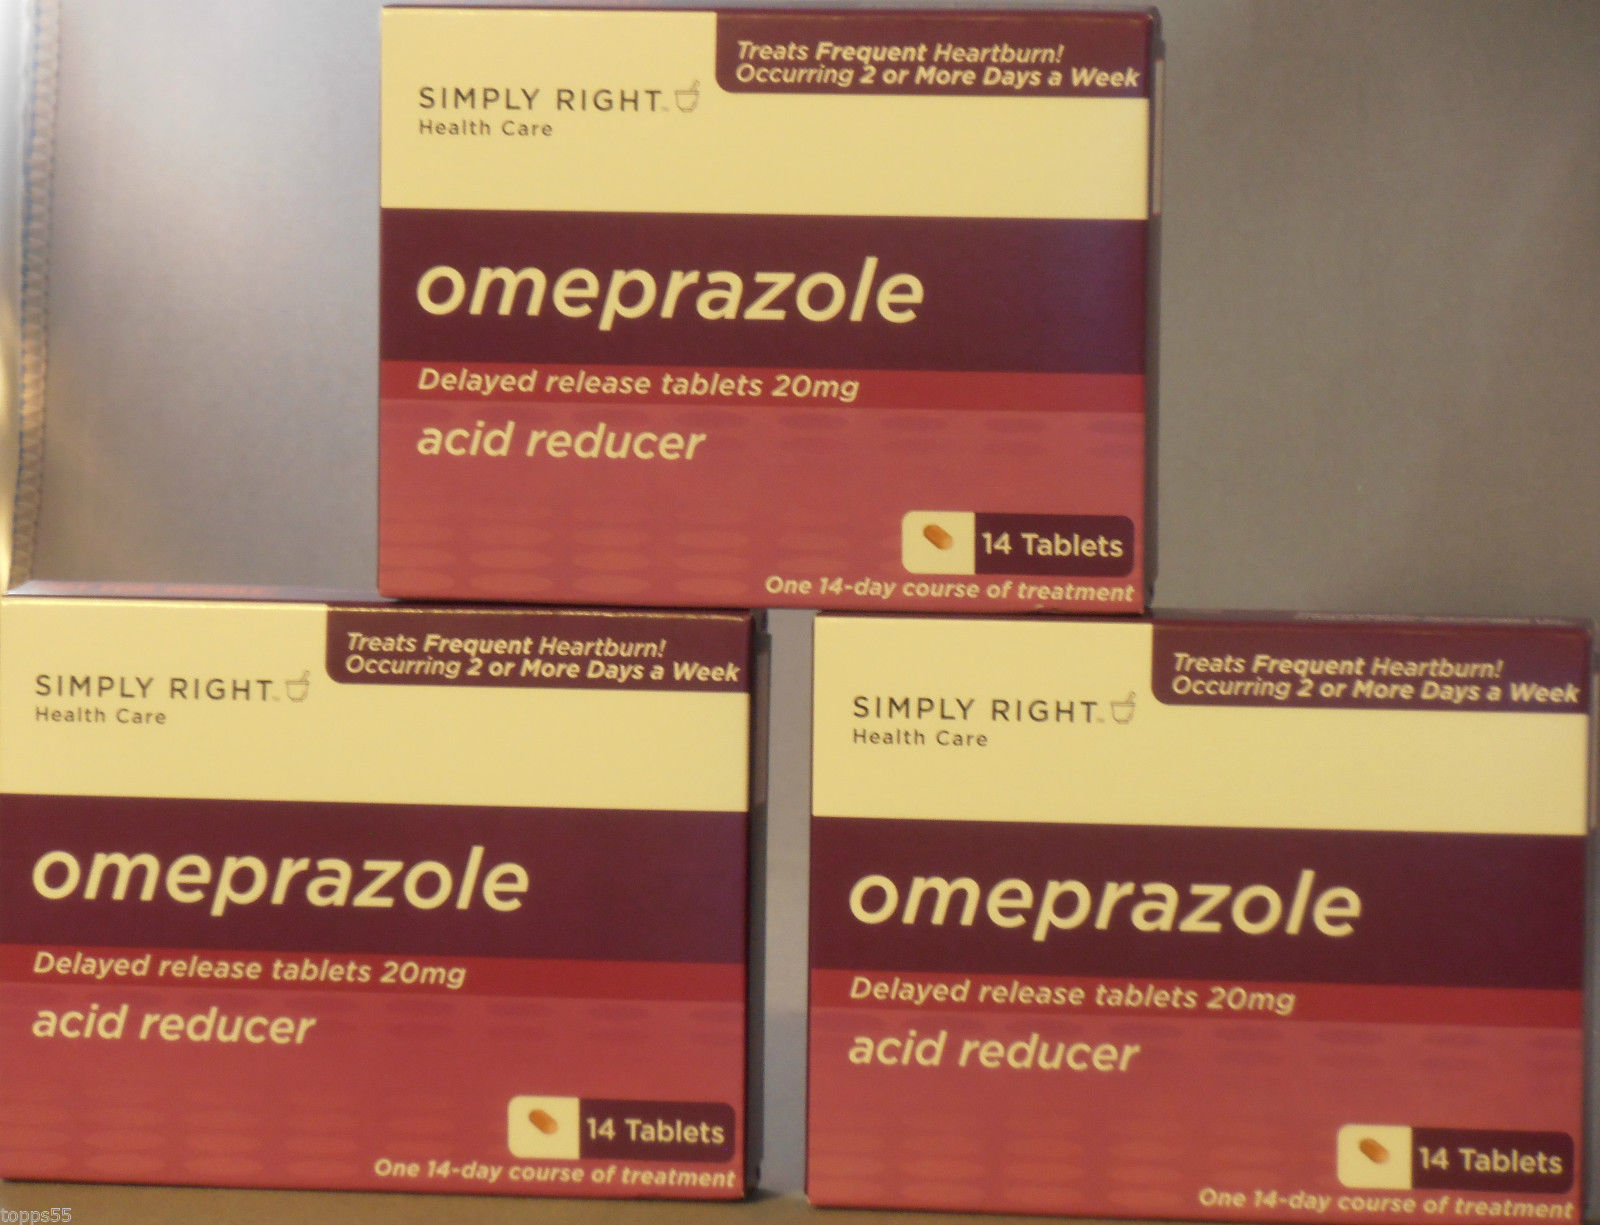 42ct Simply Right Generic Omeprazole OTC Acid Reducer HeartburnTablets 20mg New -- US Delivery